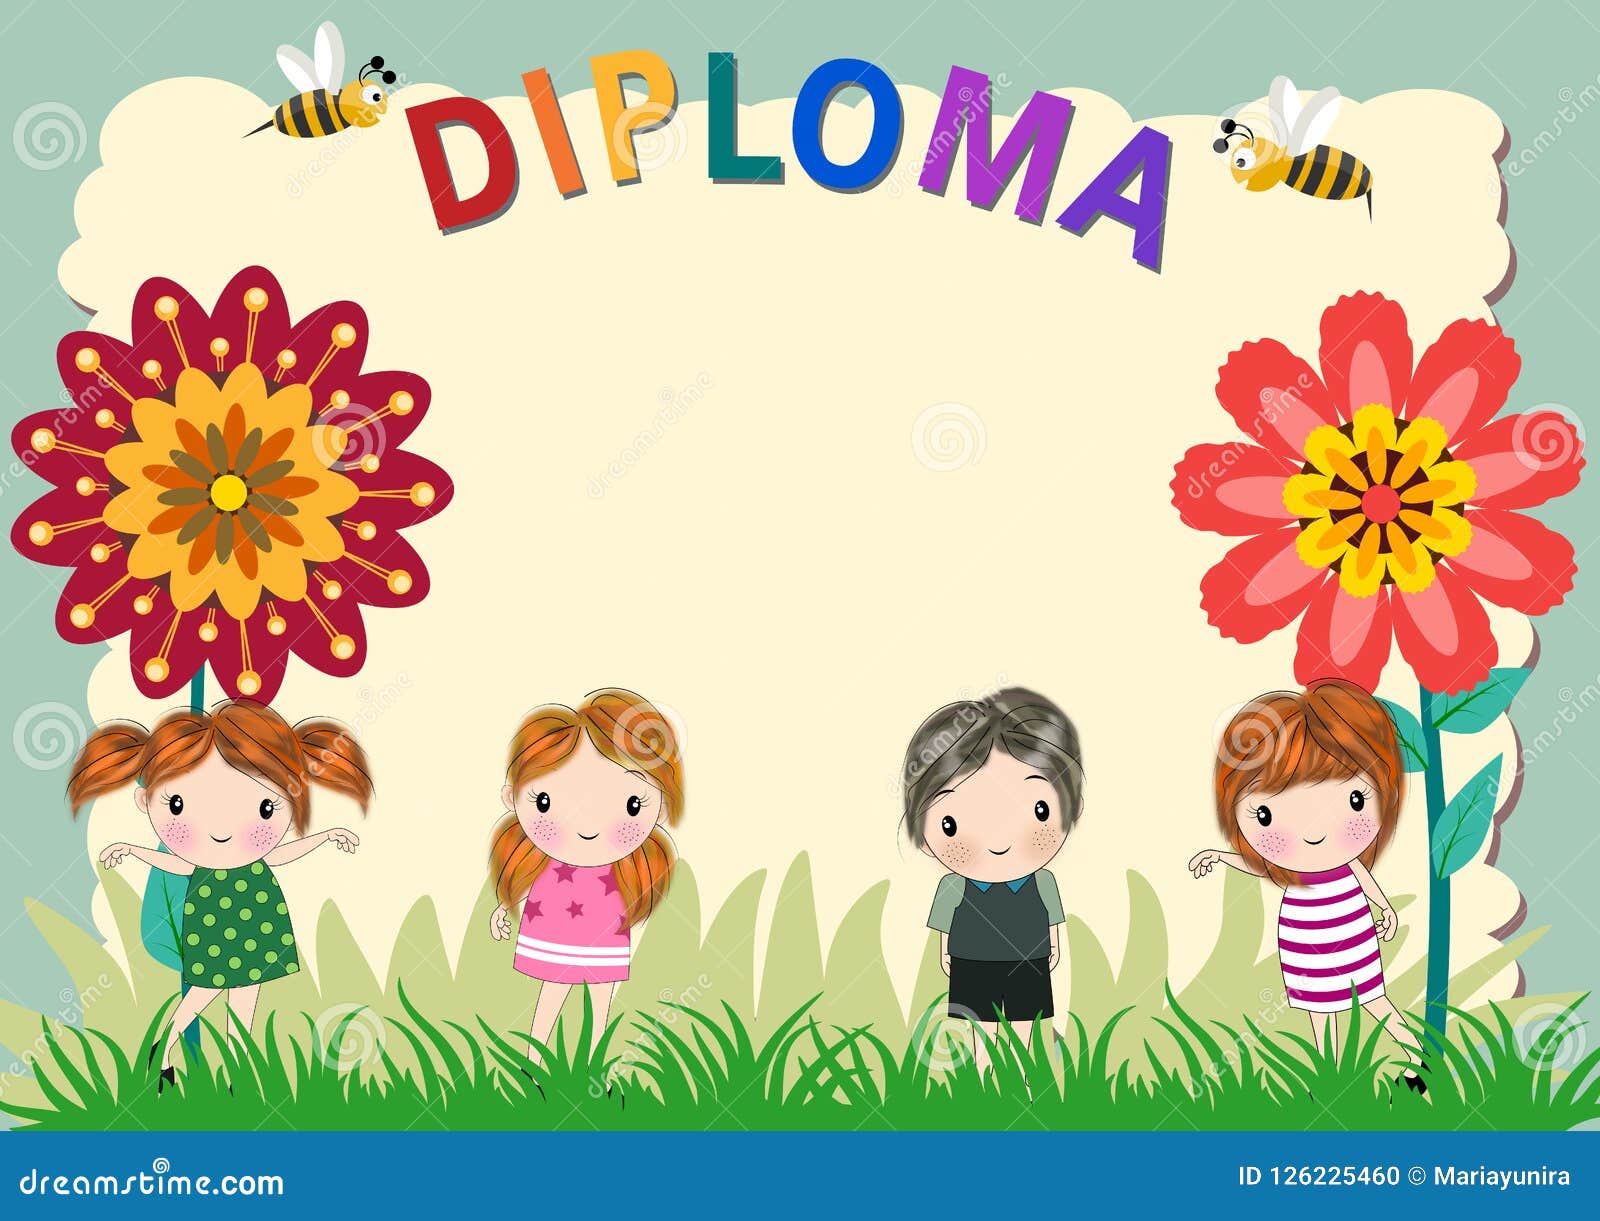 Kindergarten Diploma Template Free from thumbs.dreamstime.com